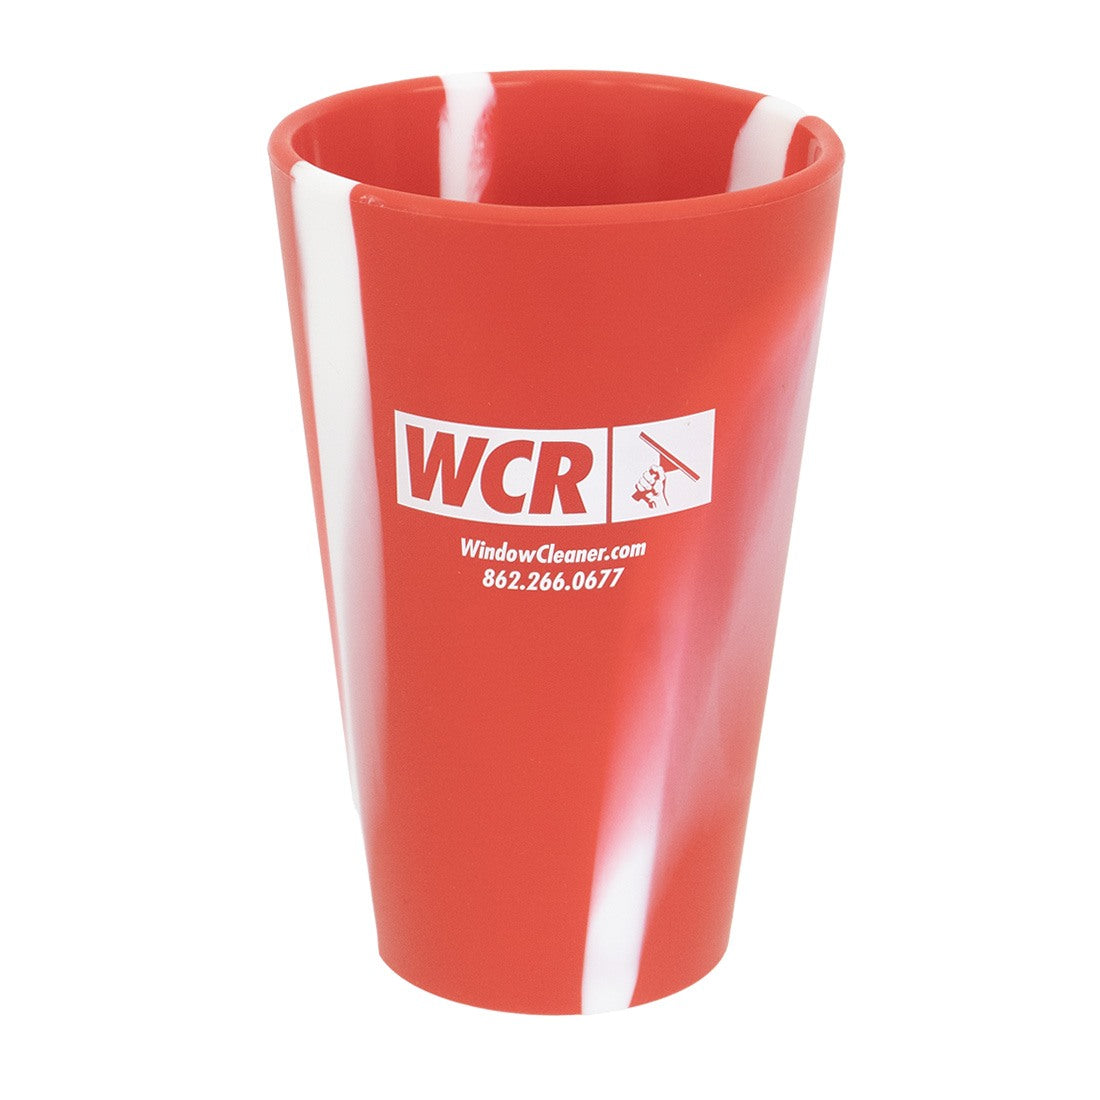 WCR Silicone Cup Red Top Angle View